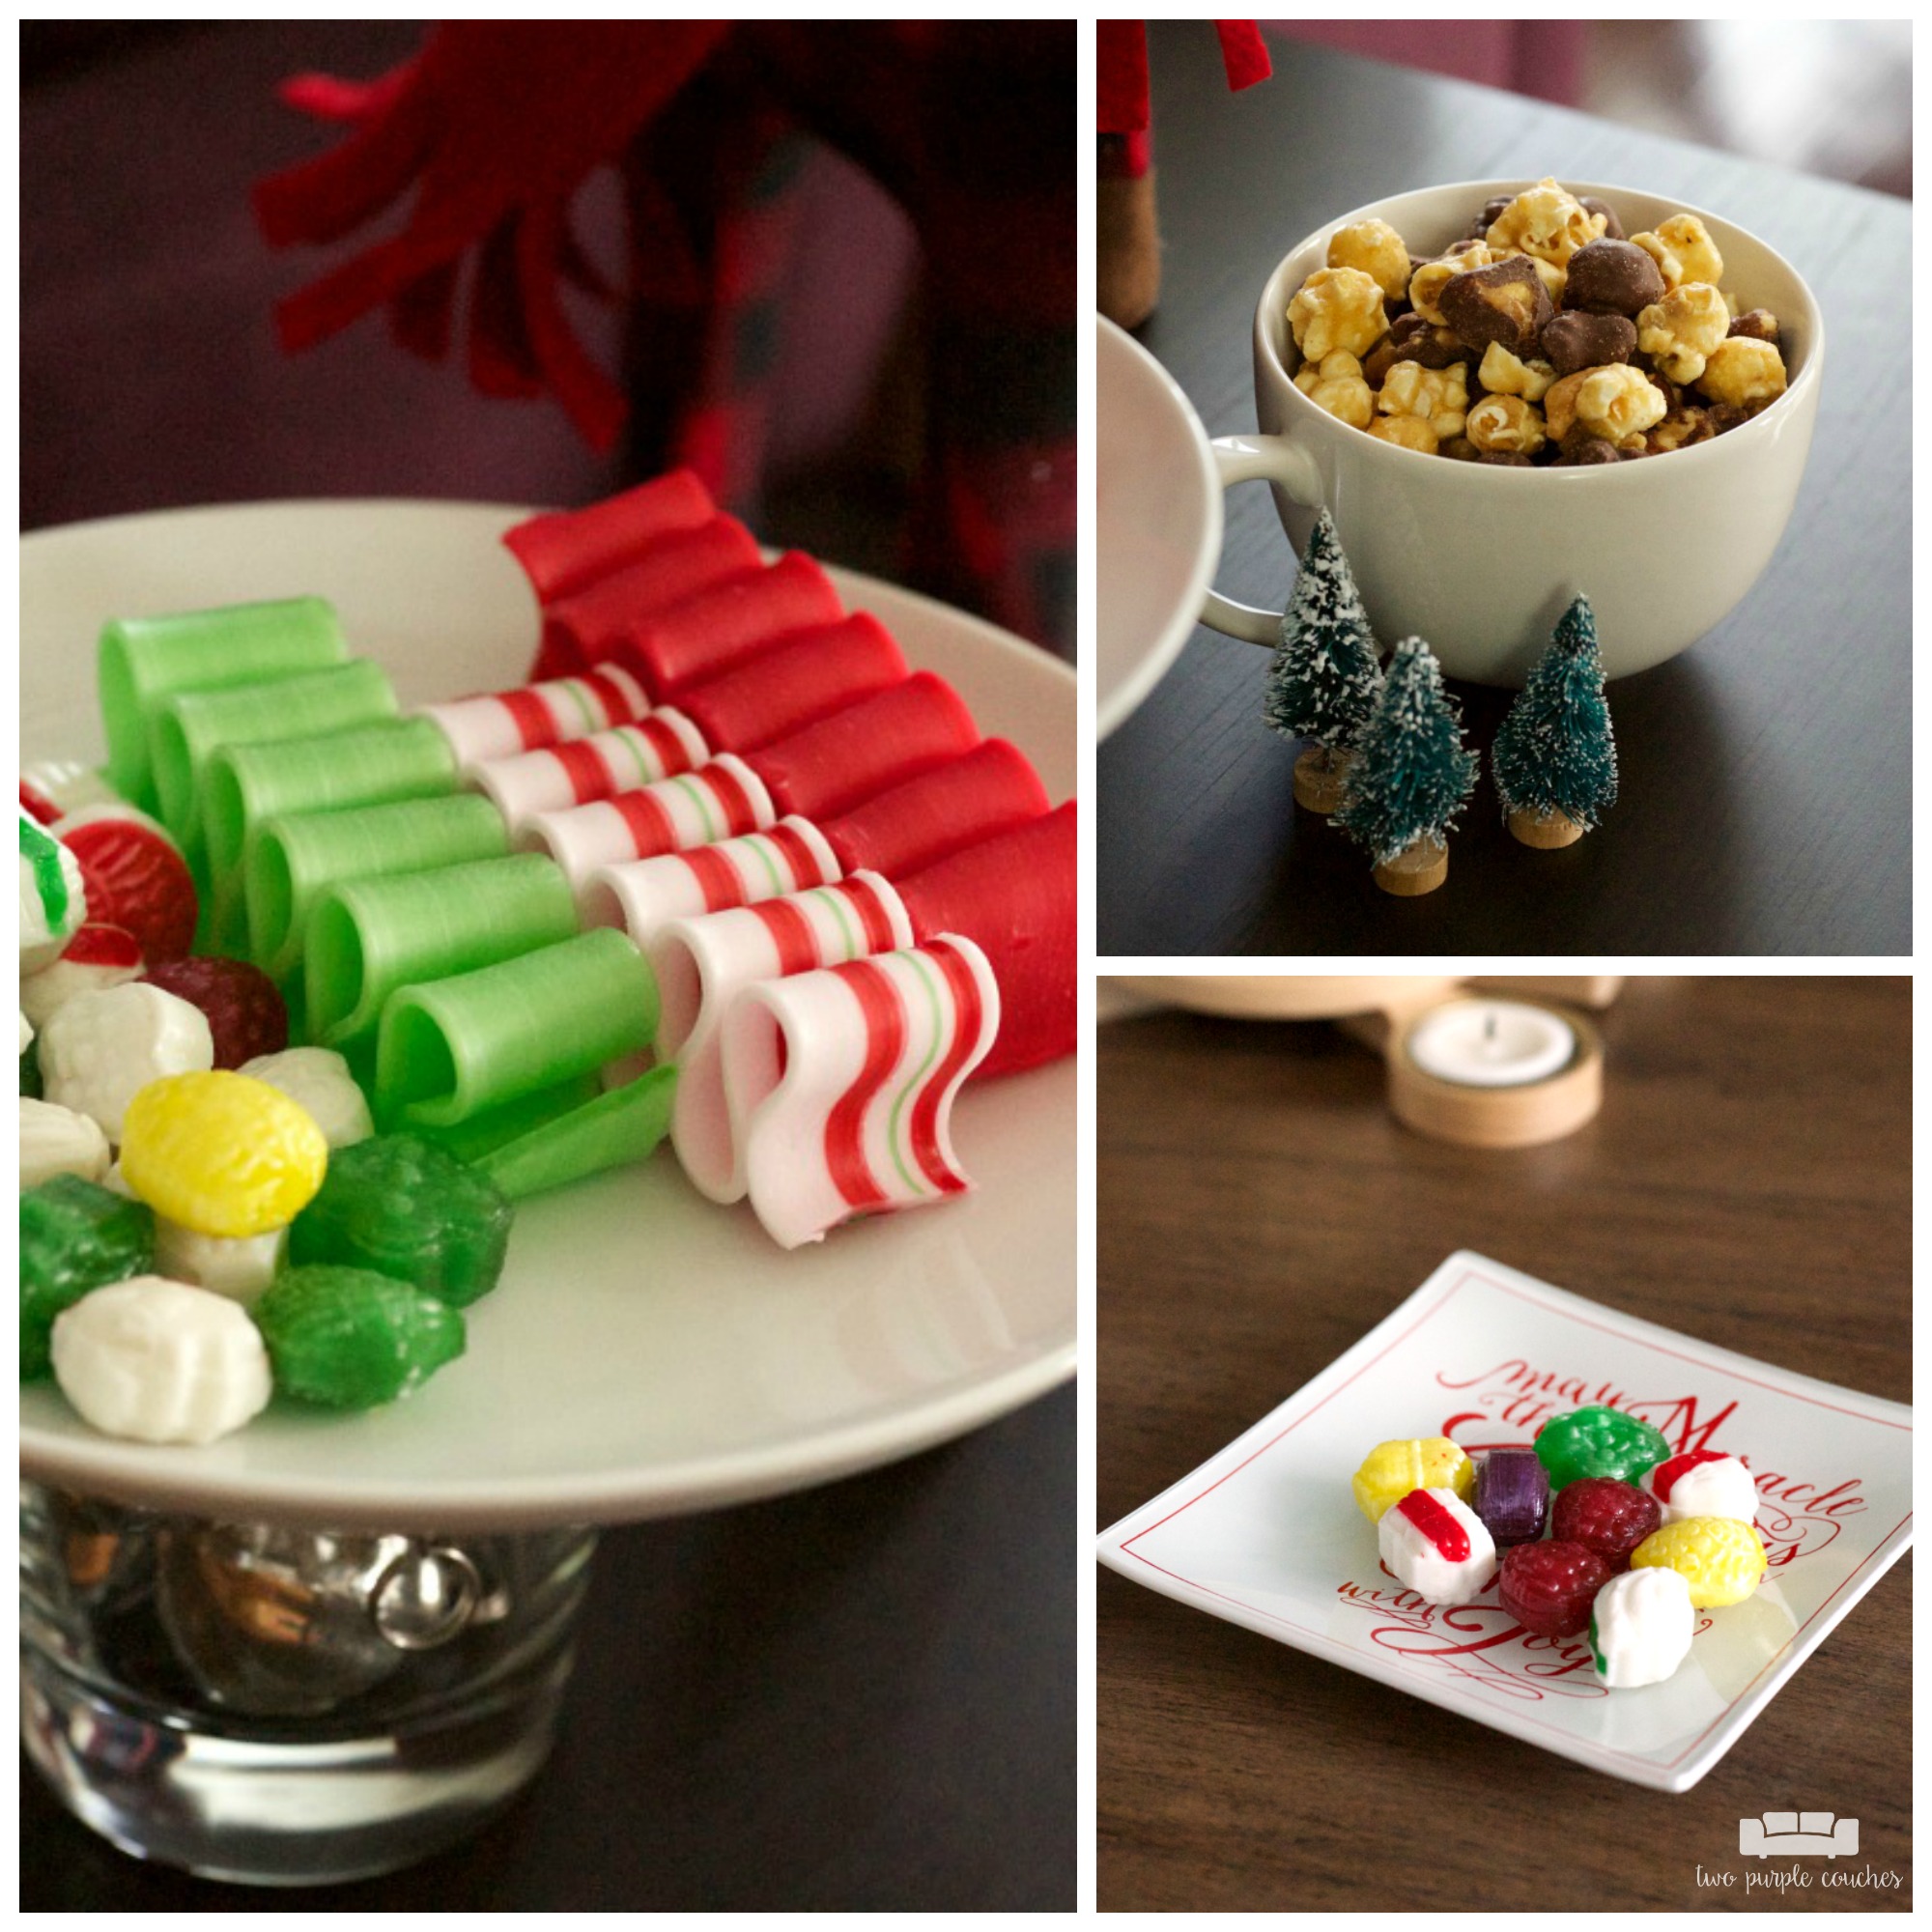 Classic candies and sweets for a cozy holiday home